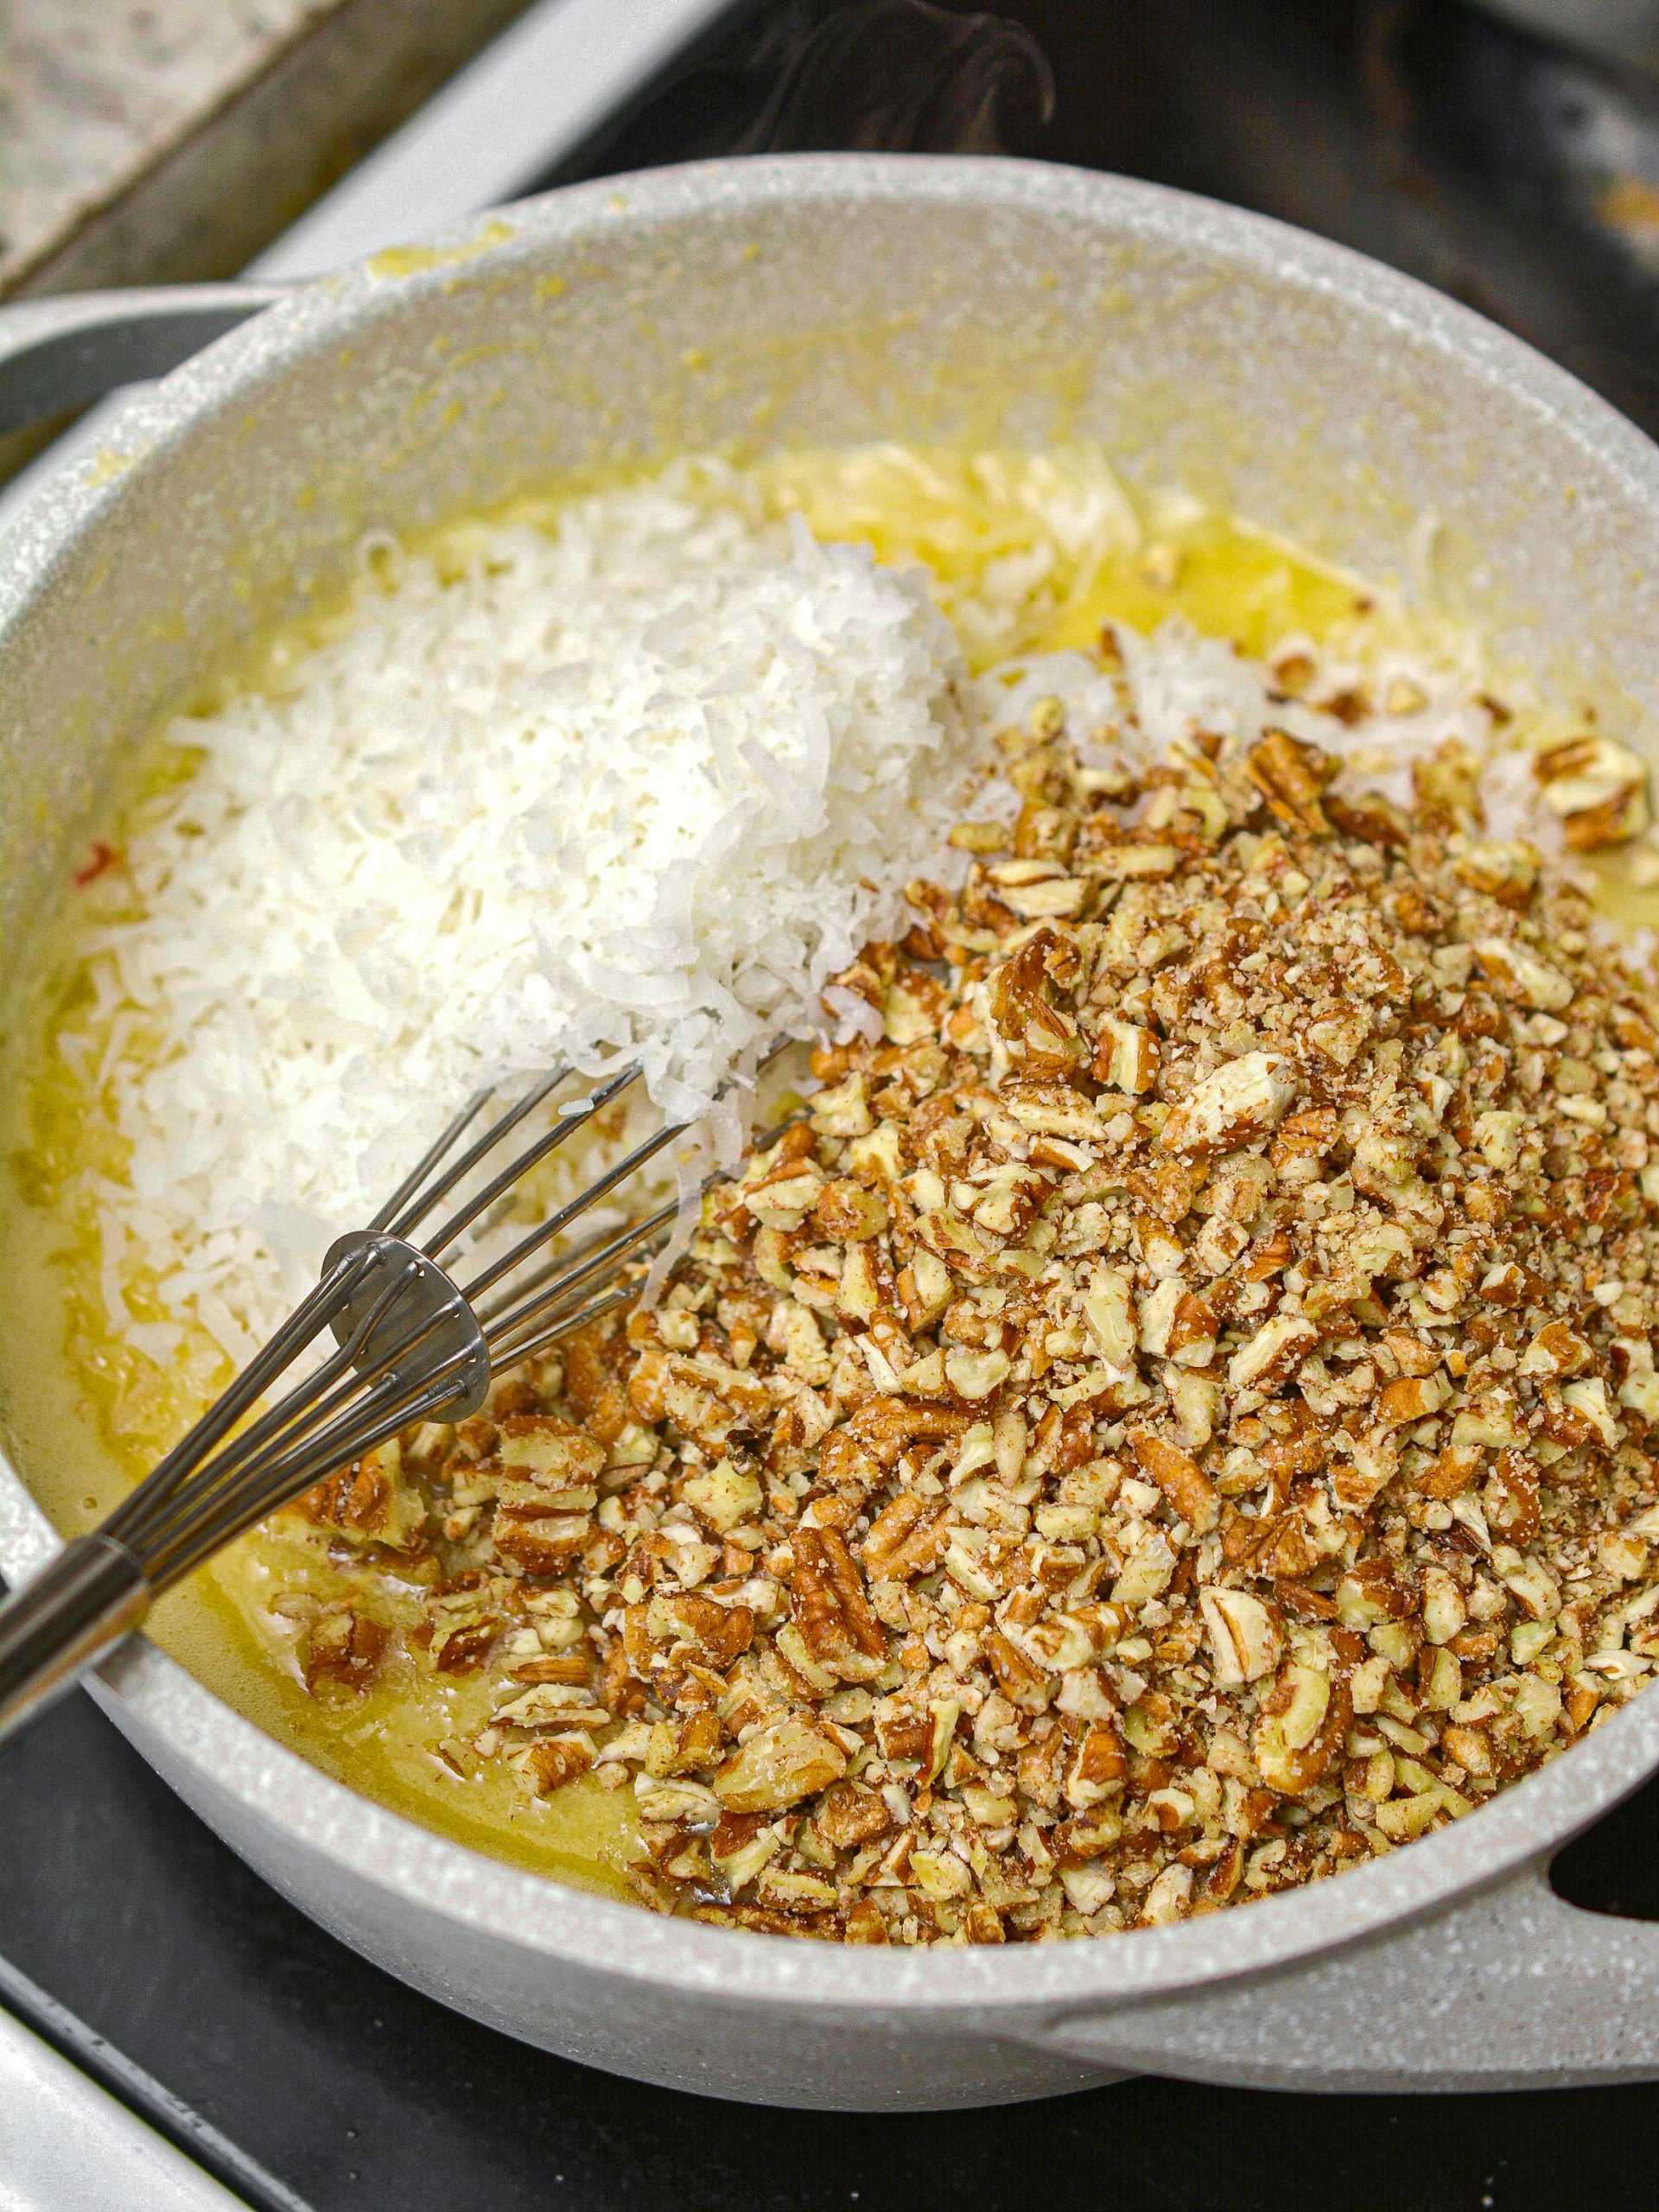 Stir in the coconut and pecans.